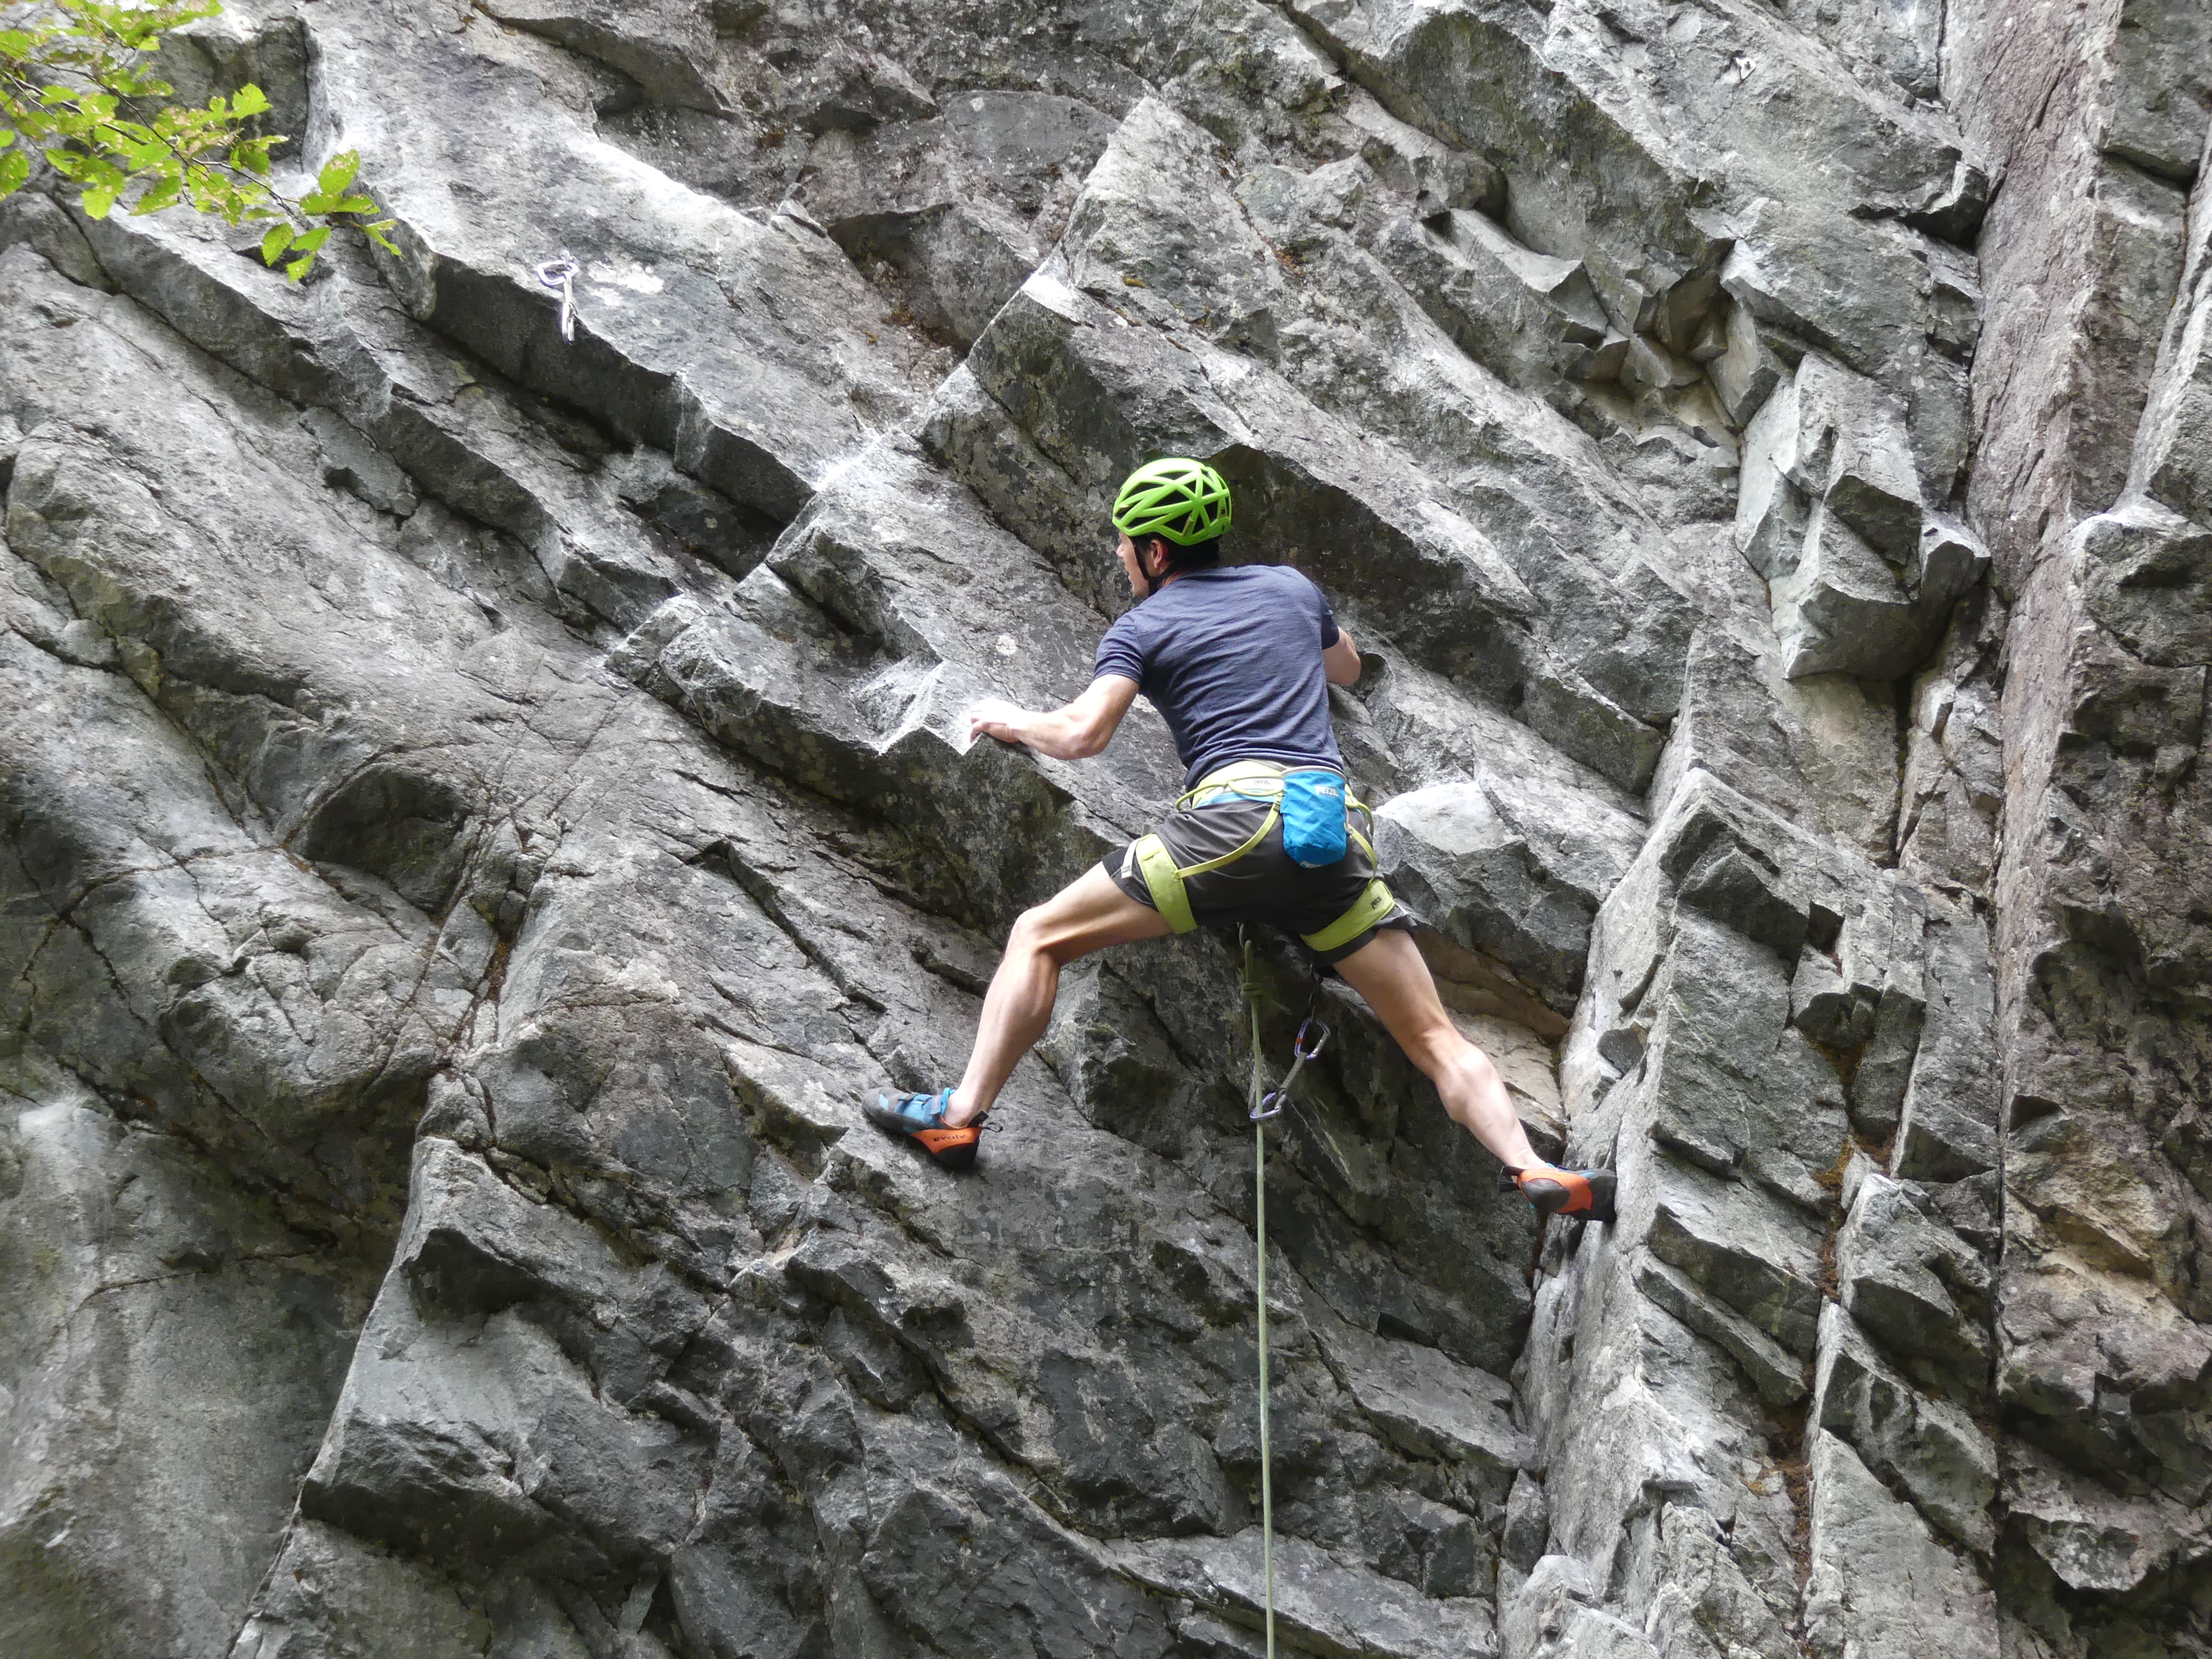 Alexei on his way to the fifth bolt on Creepy Crawlers (grade 5.11a) on the Forgotton Wall at Cheakamus Canyon.